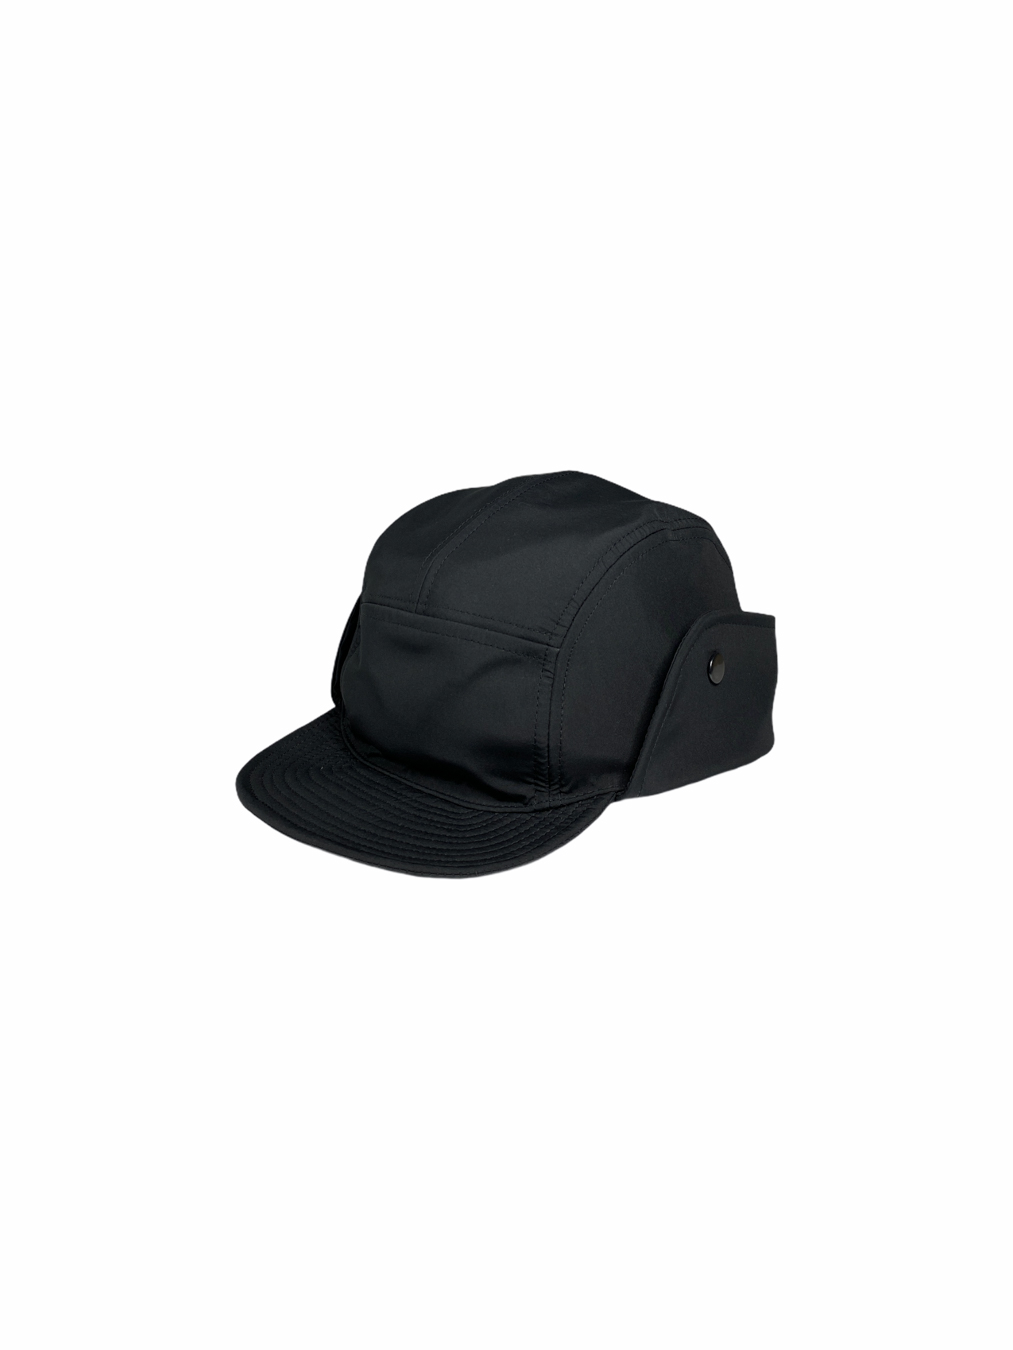 New Camp Cap With Ear Flap (Black) 